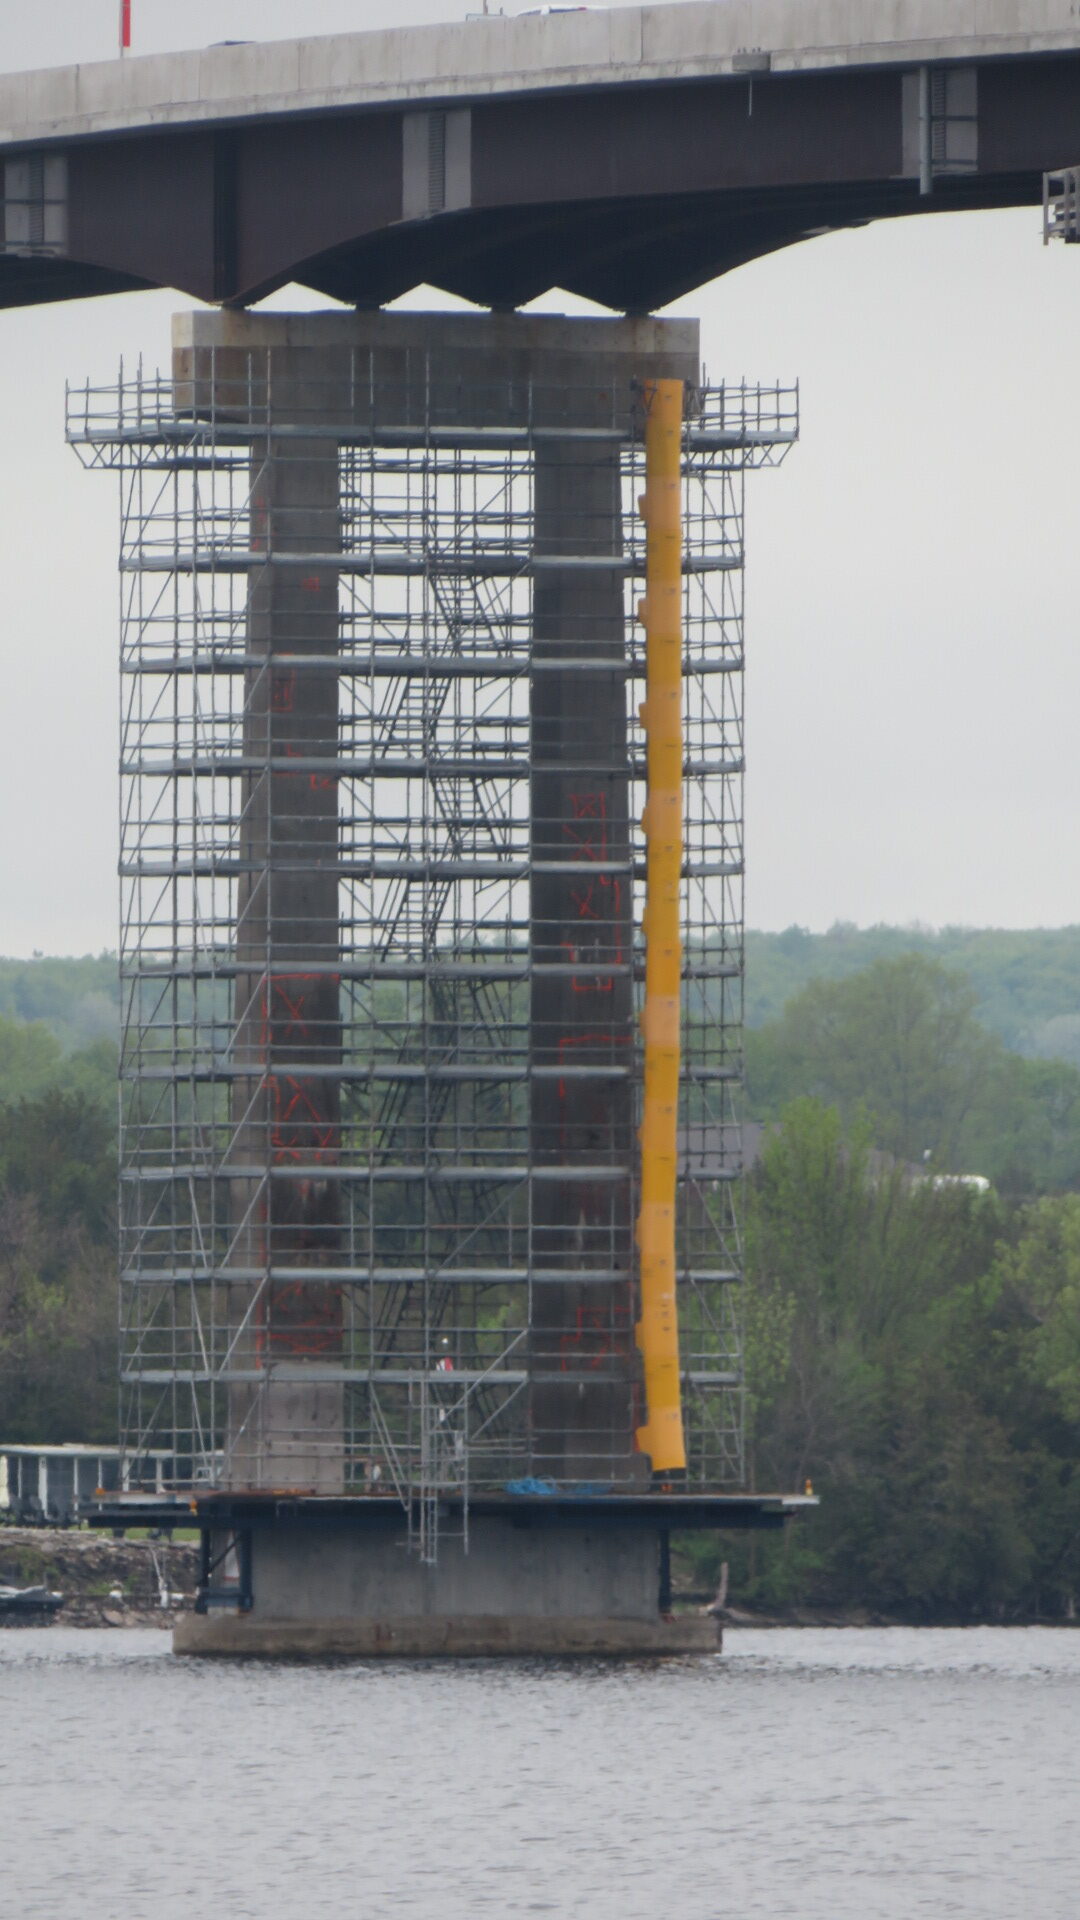 Completed pier 9 scaffolding, containment chute